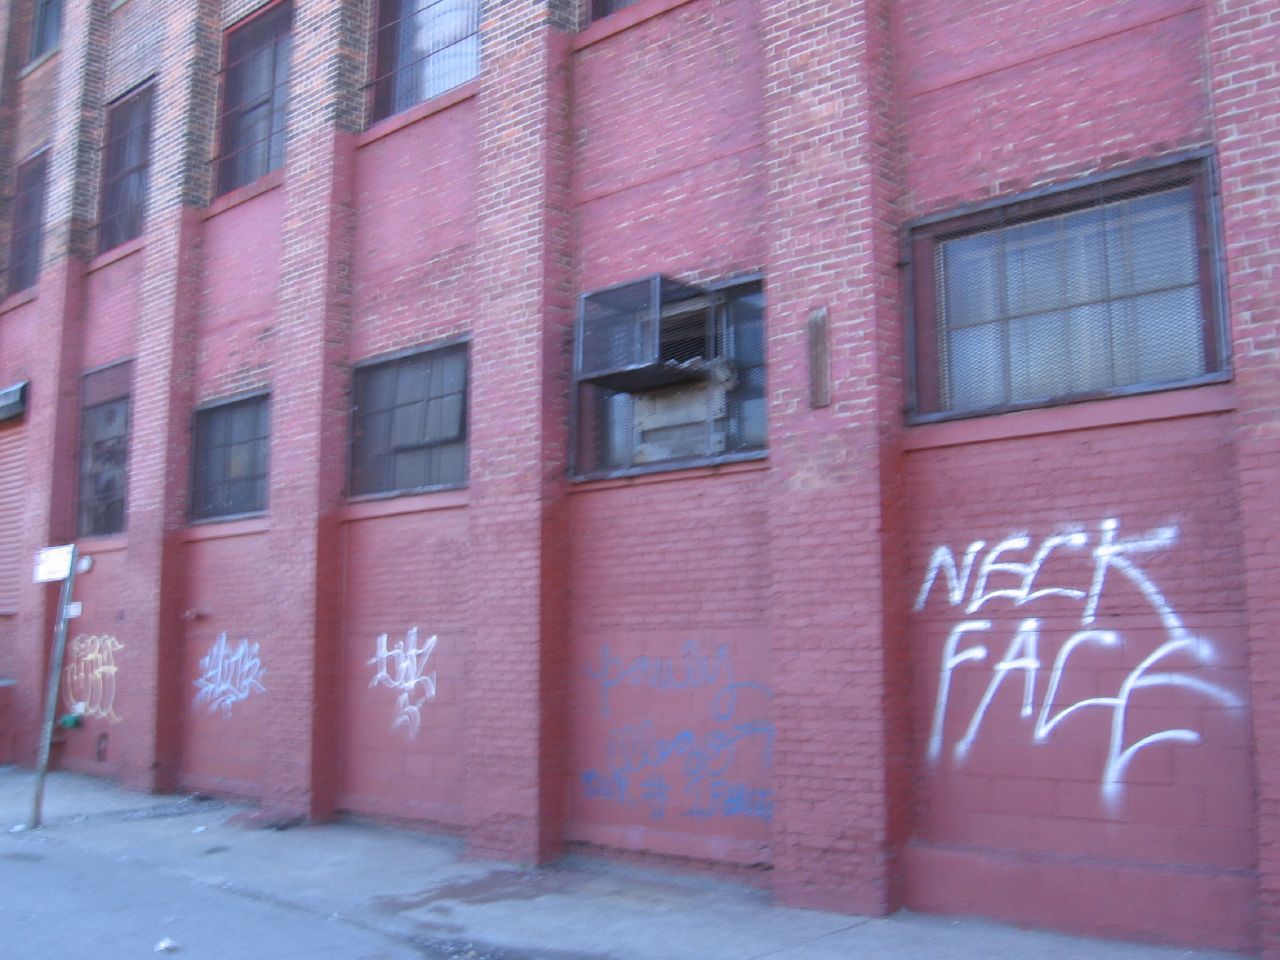 the windows in the building have been covered with graffiti